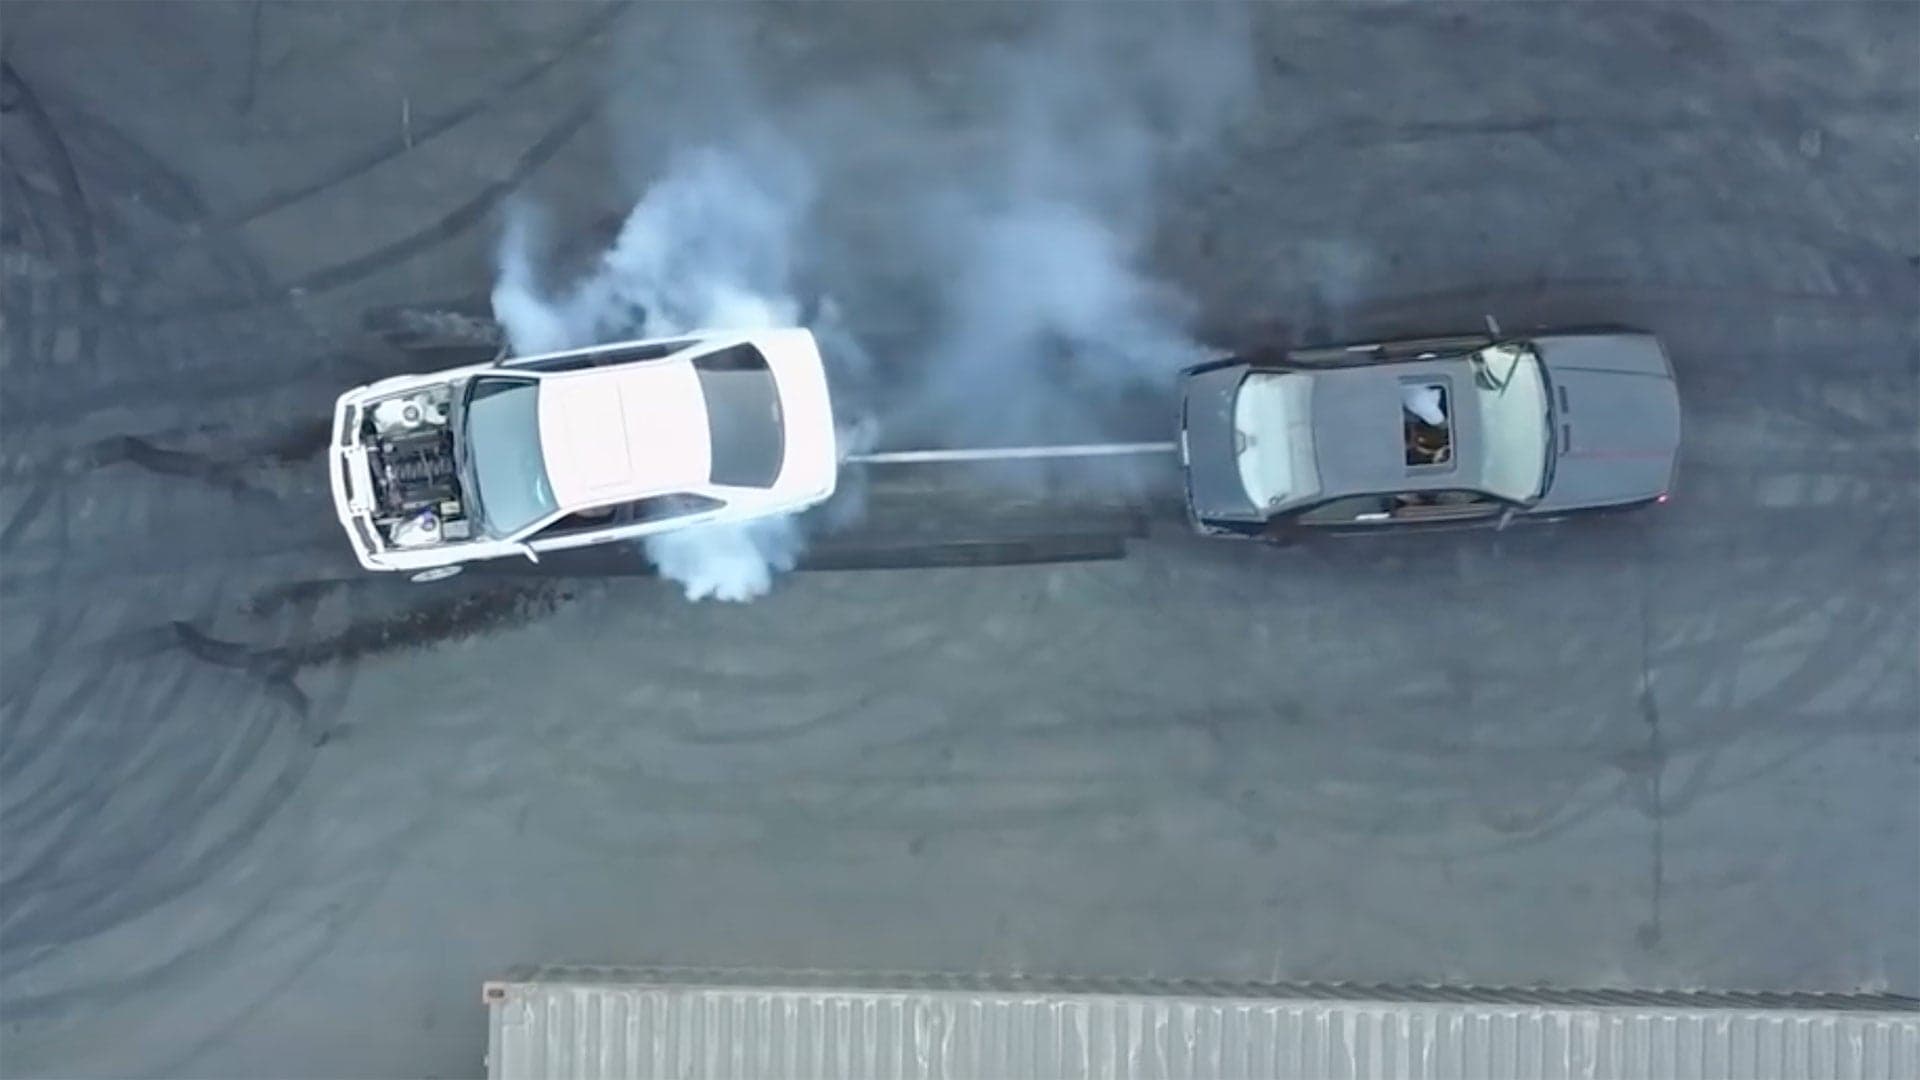 Watch Hoonigan Pit Two BMW E36s to the Death in an Epic Tug-of-War Battle